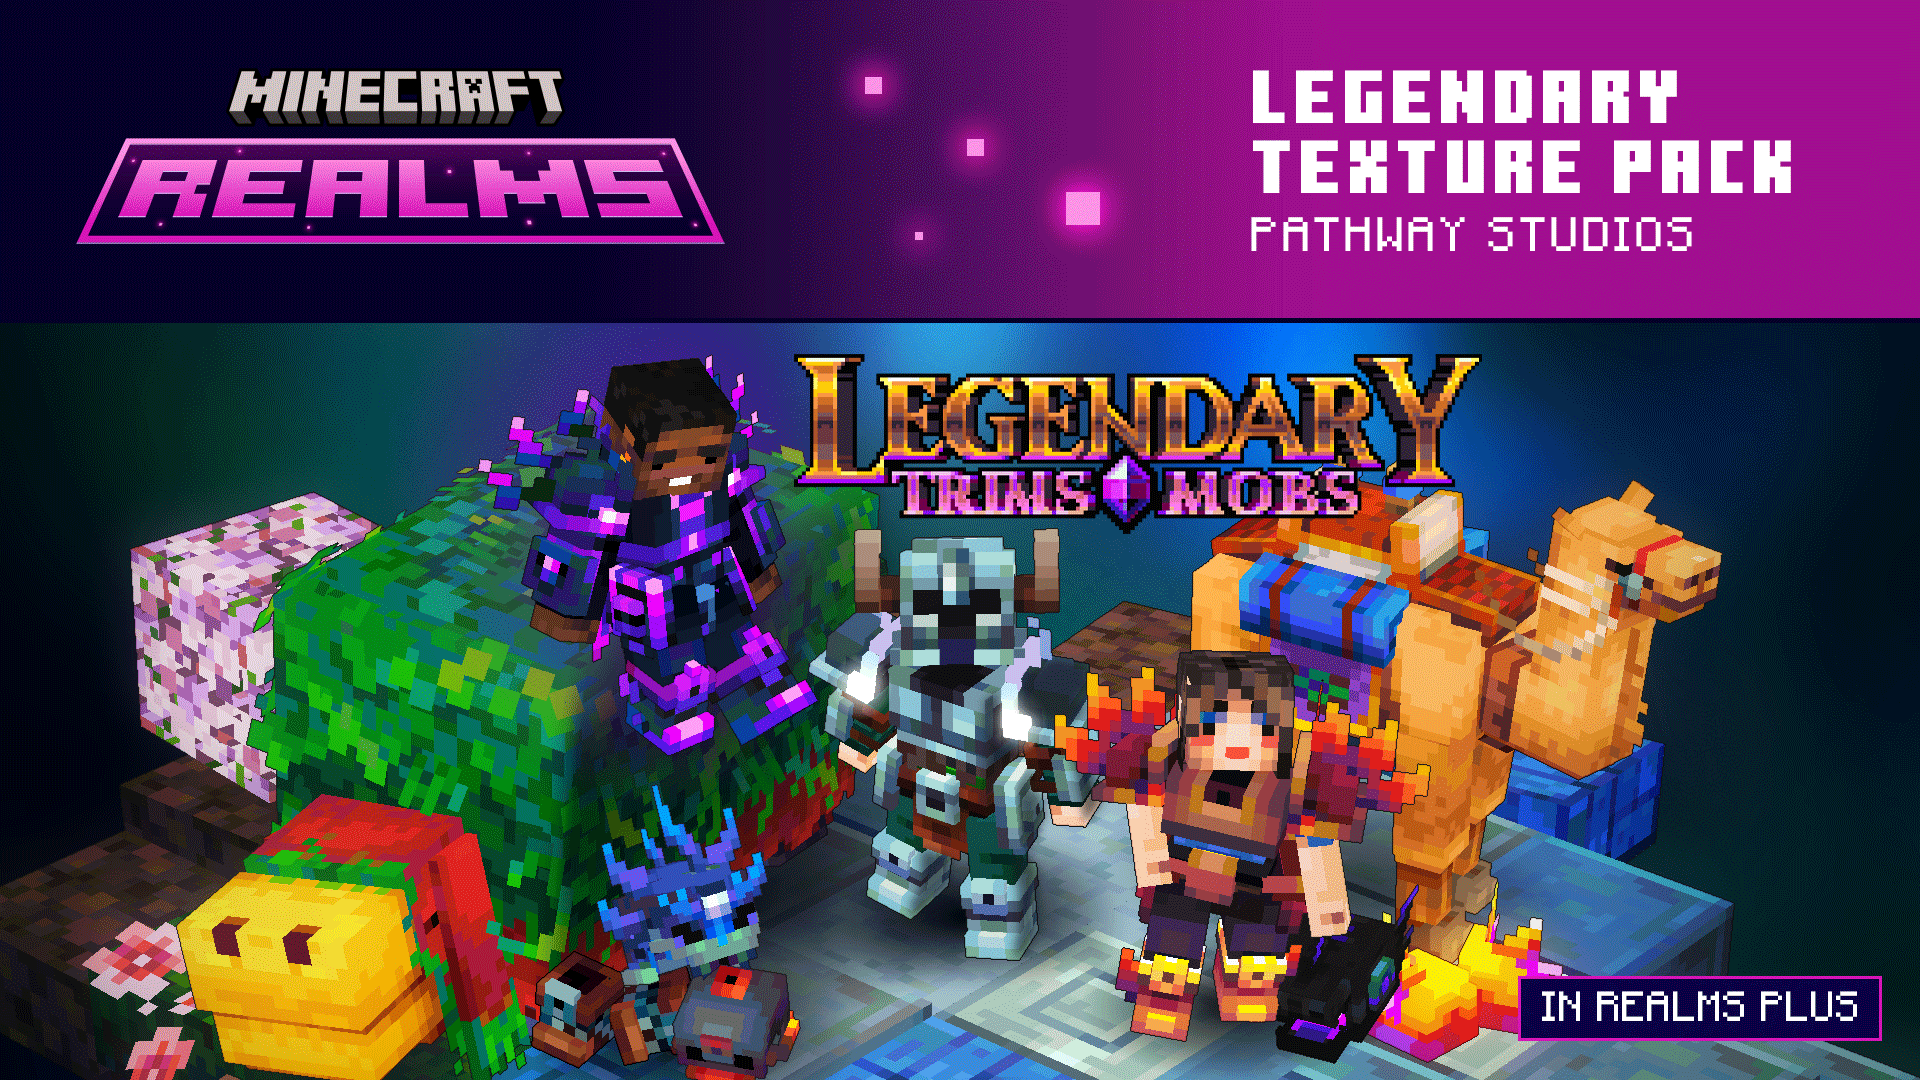 Legendary Texture Pack in Minecraft Marketplace